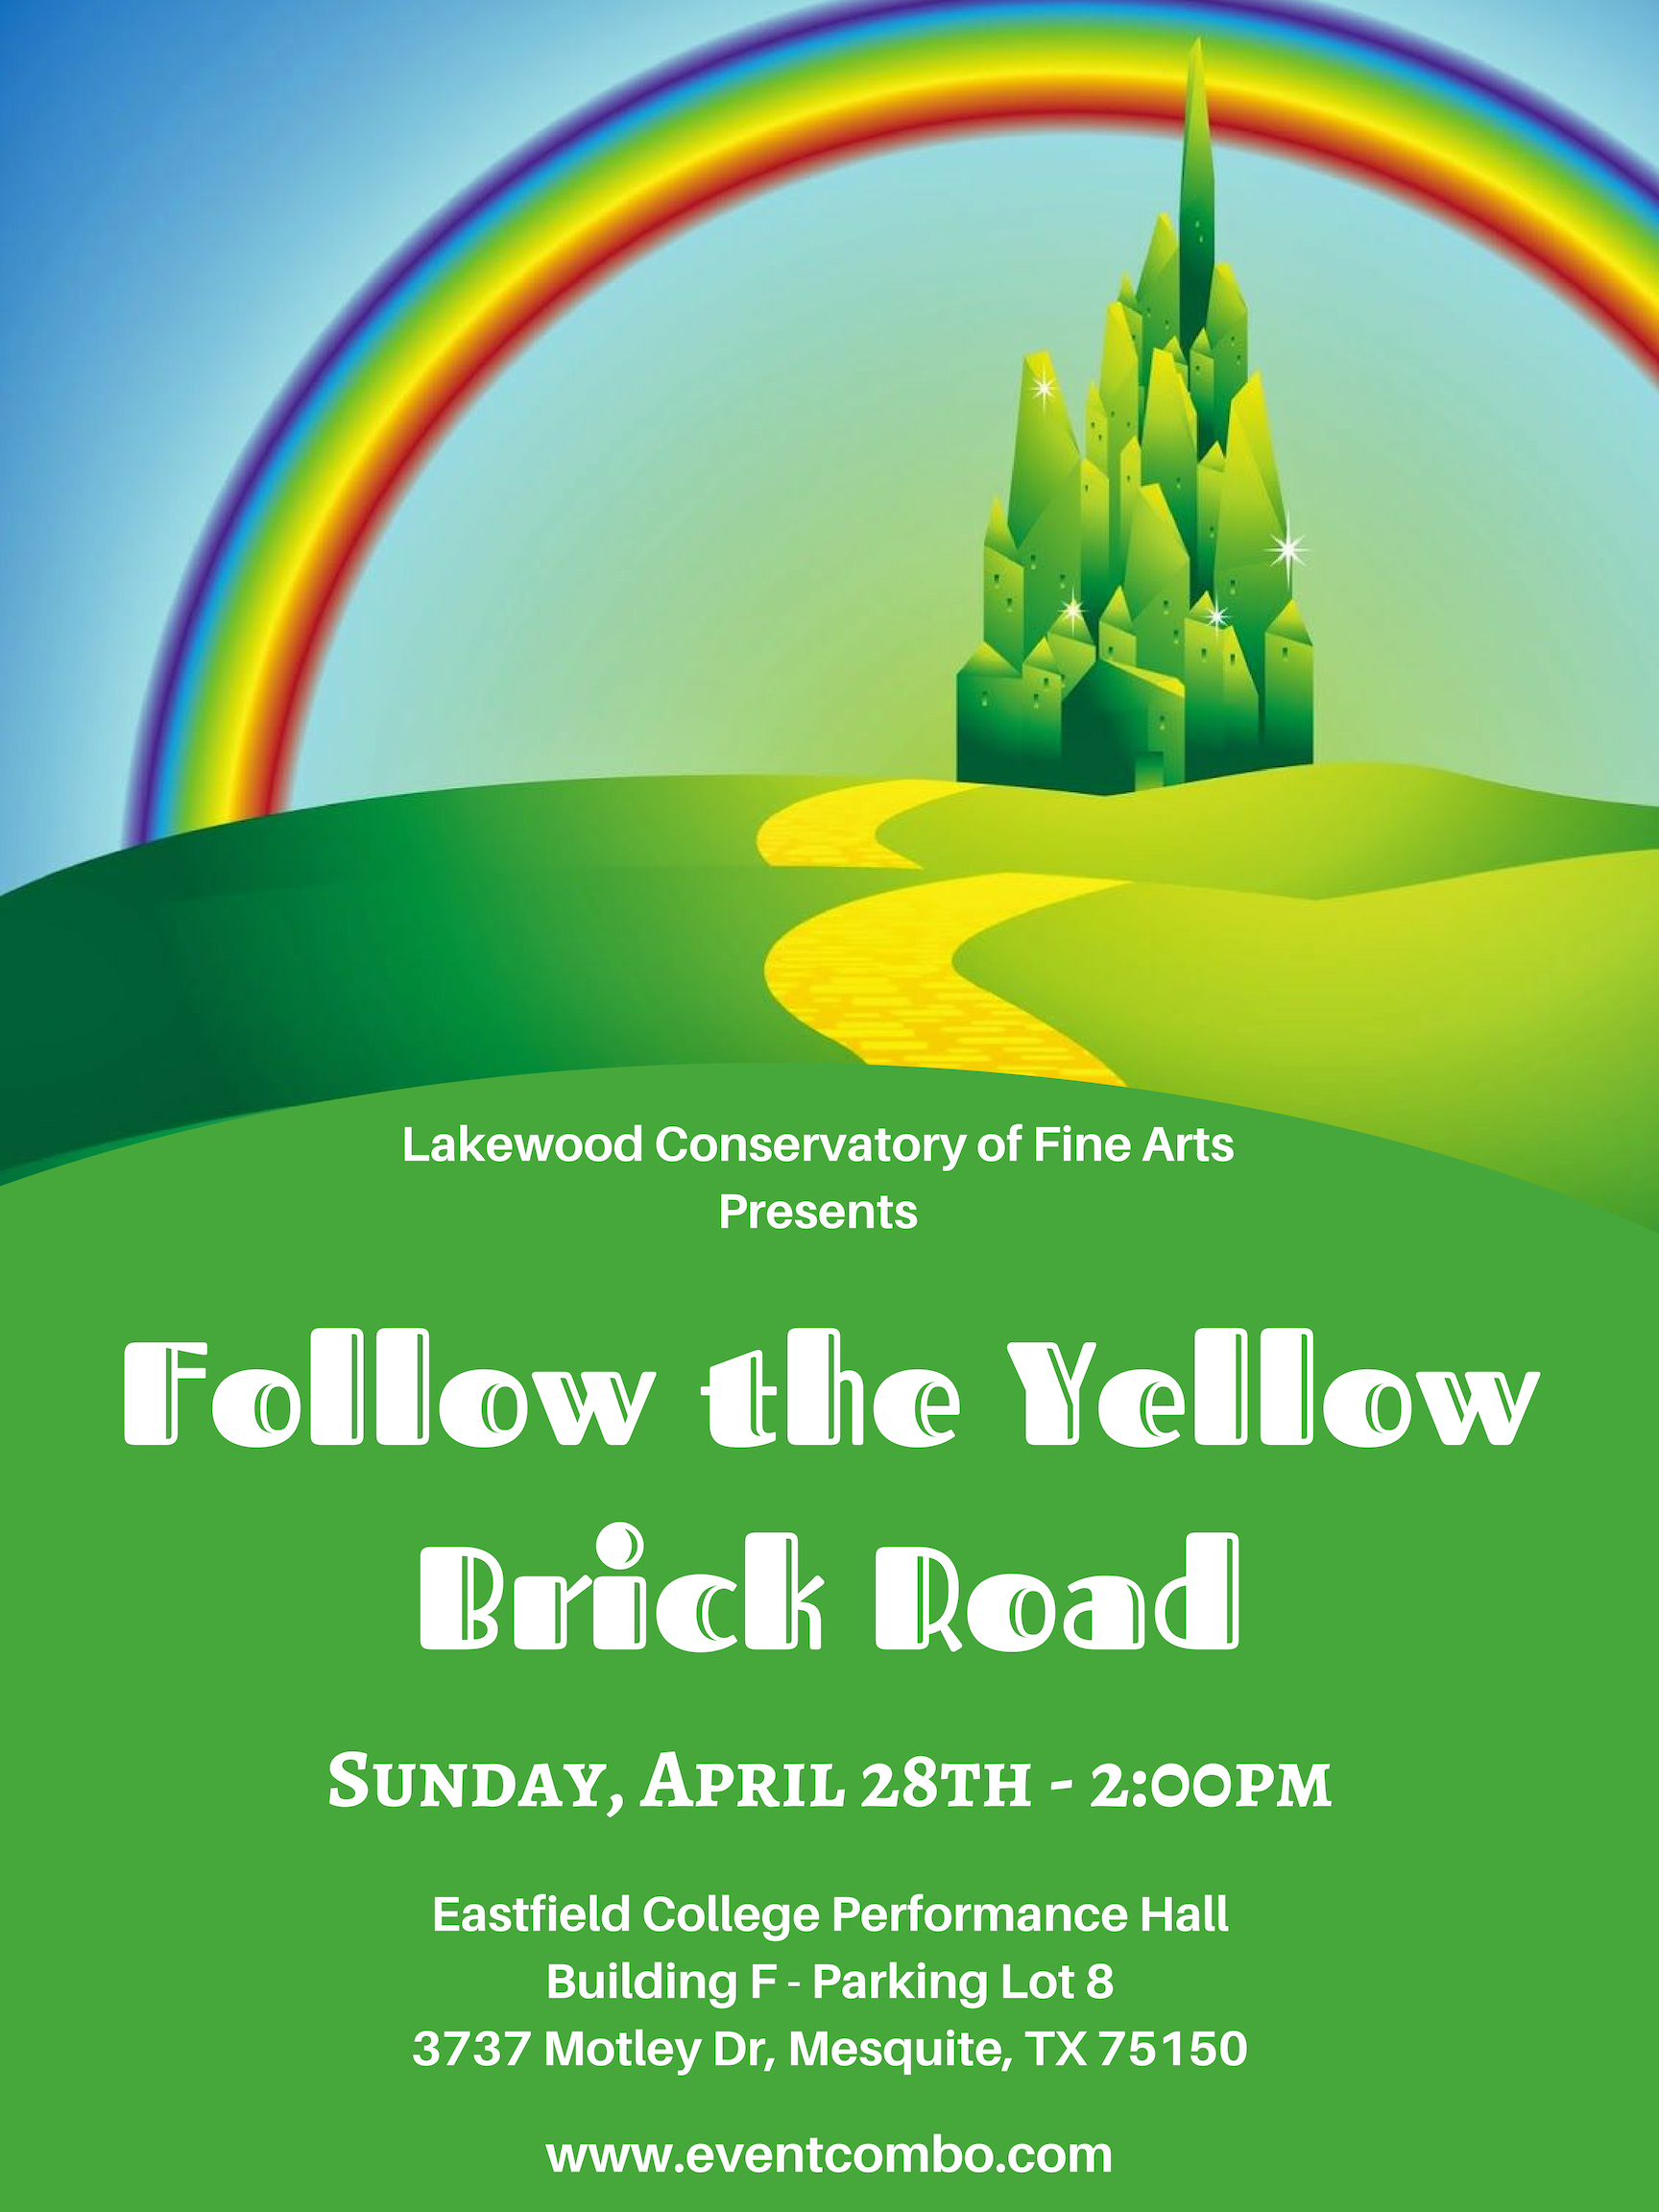 Follow The Yellow Brick Road - Lakewood Conservatory of Fine Arts